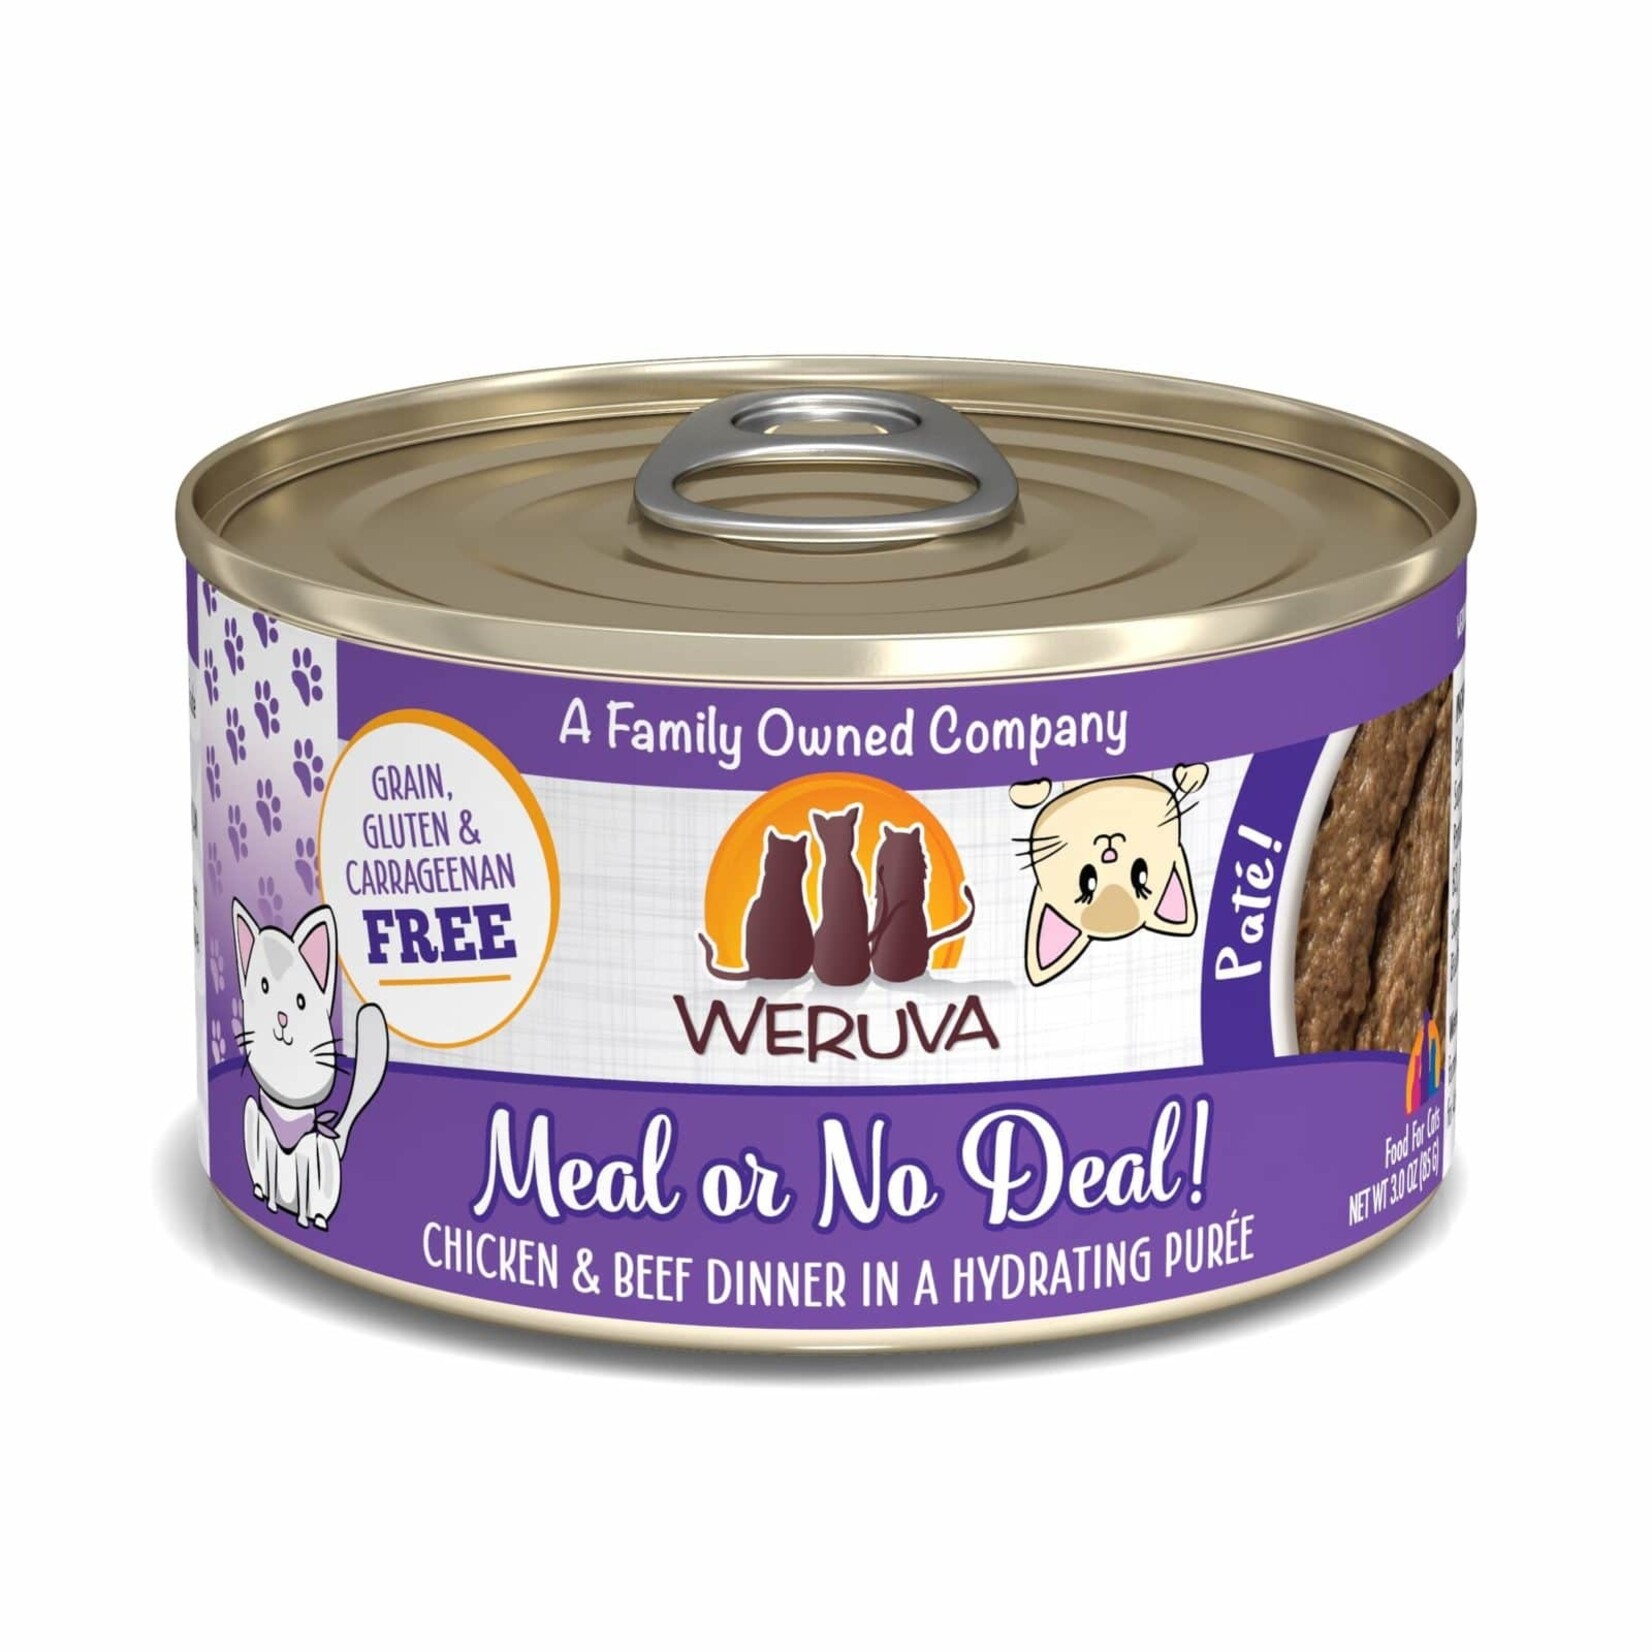 Weruva Meal or No Deal Chicken & Beef Dinner in a Hydrating Purée Wet Cat Food